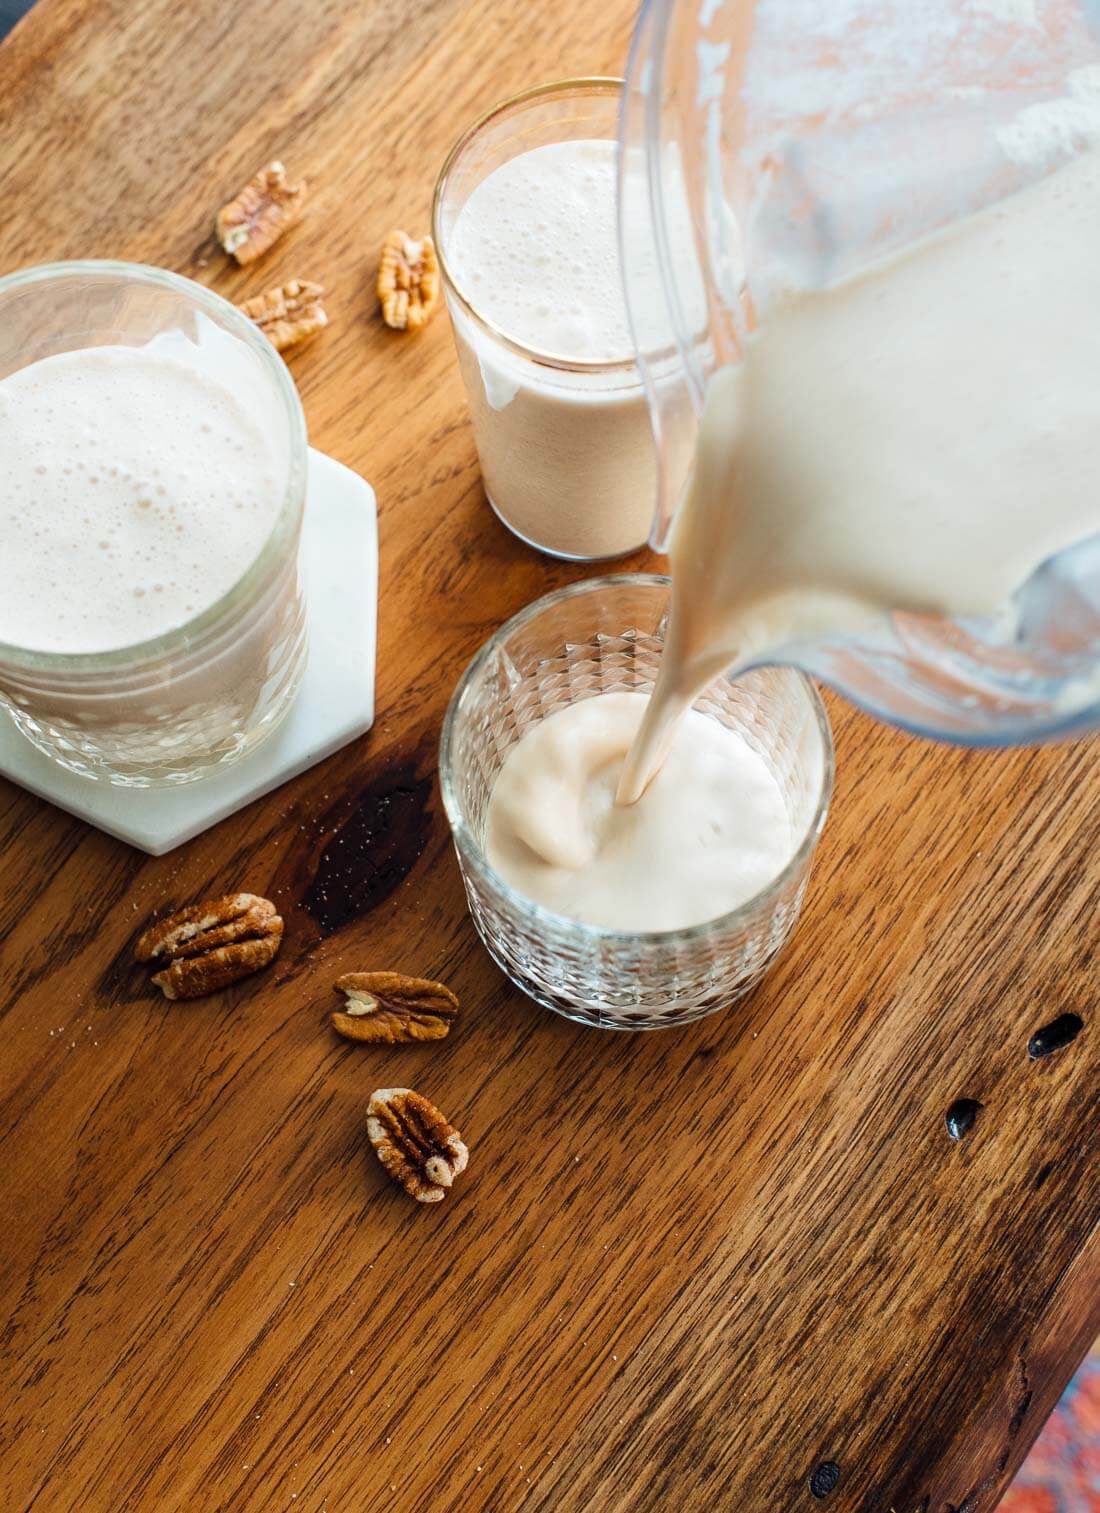 Homemade pecan milk is SO easy and delicious! Unlike almond milk, this nut milk recipe doesn't require straining.